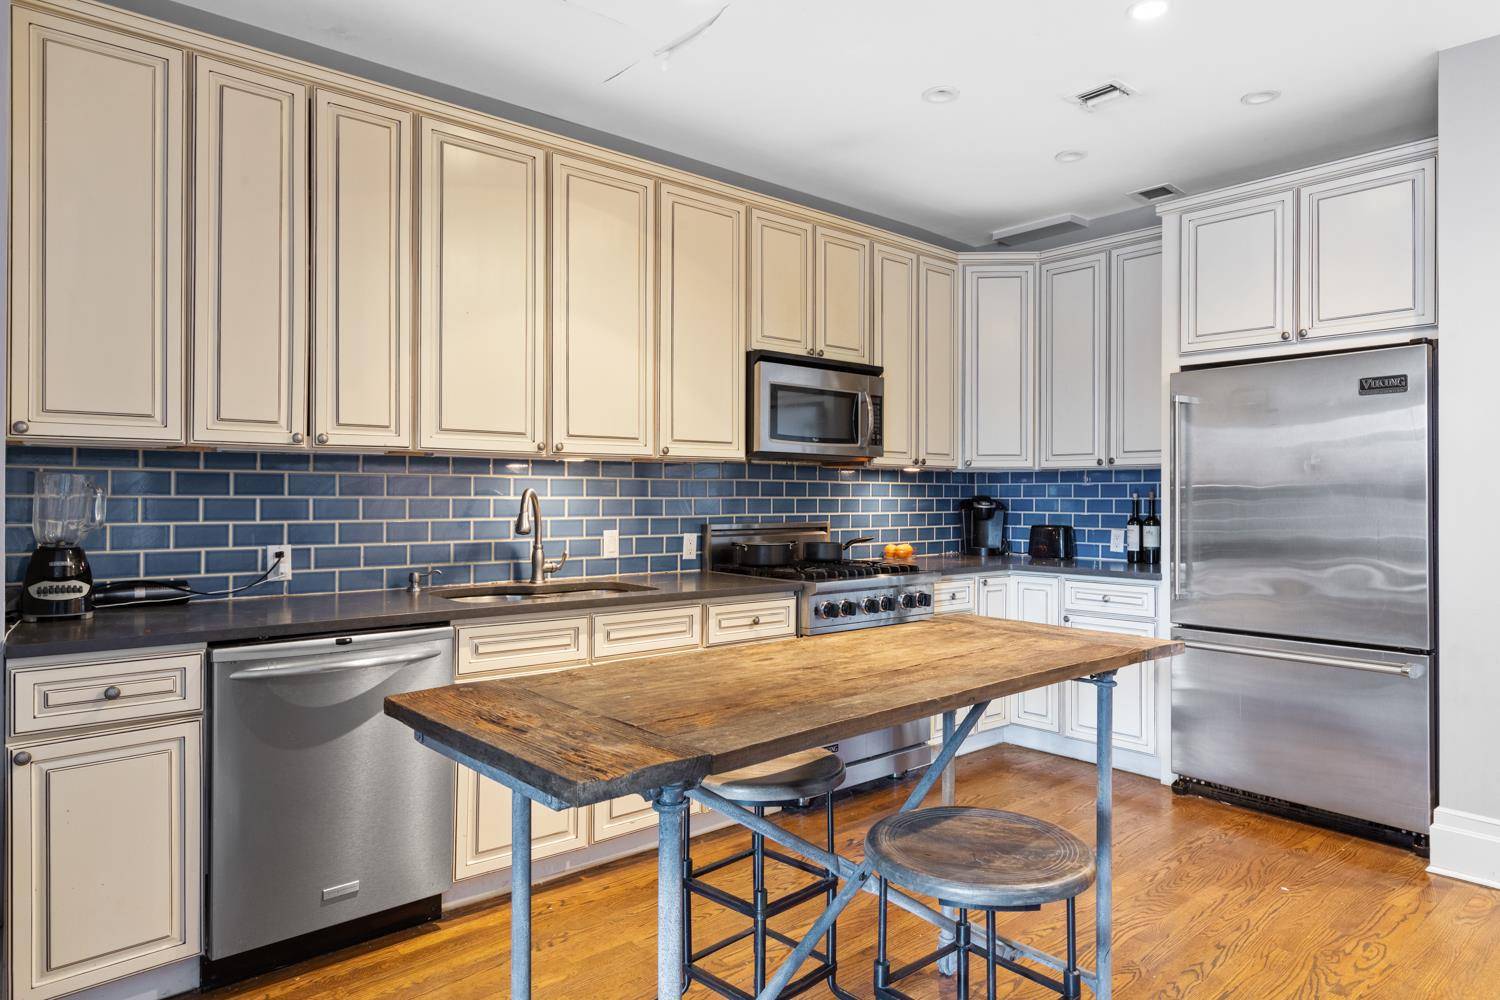 This beautiful brownstone condominium is located on a quiet tree lined street in a prime Manhattan location.